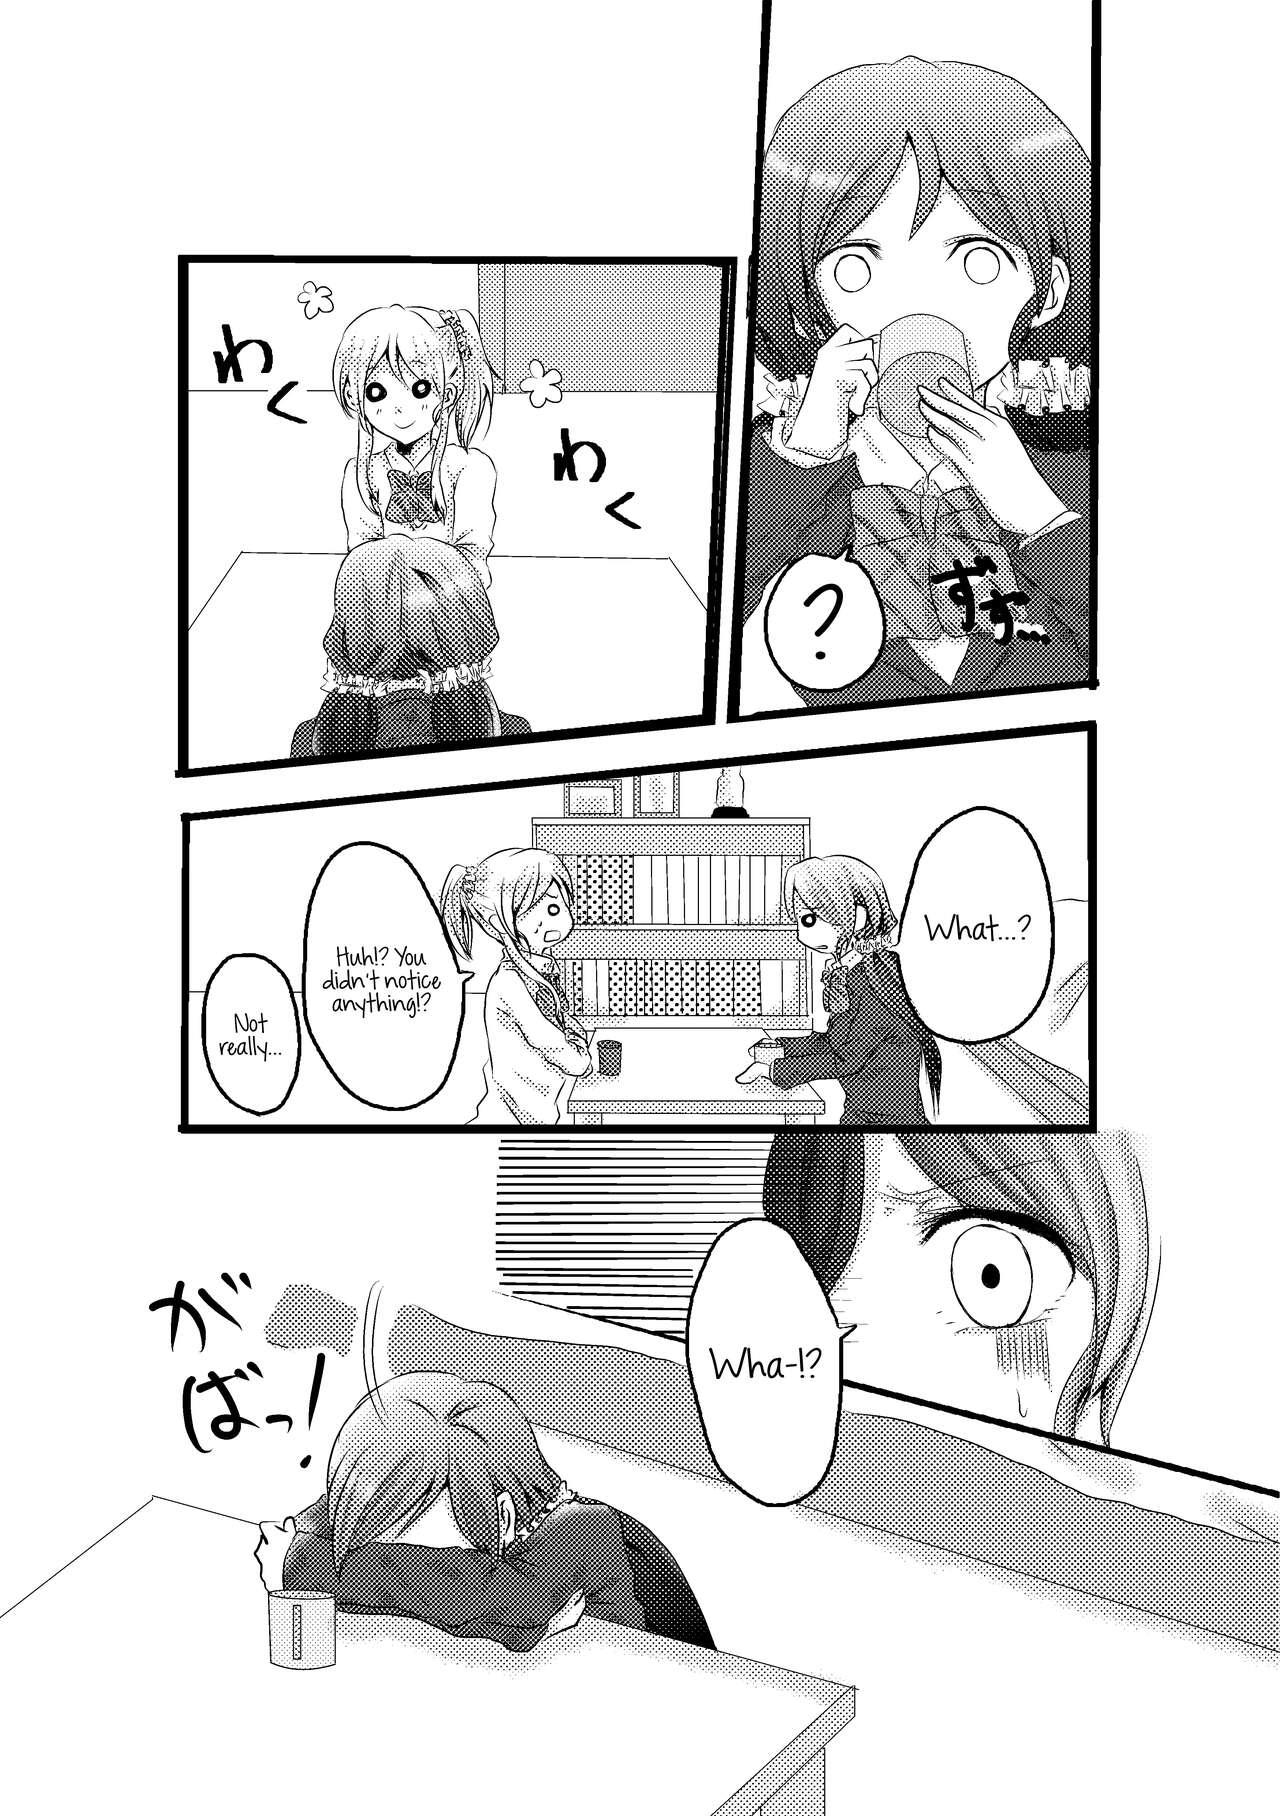 Trimmed [Inugoya (Toshiko)] A story about mischievous Eli-chan and Nozomi-chan (Umi no Shinwa) (Love Live!) [English] [Usr32] [Digital] - Love live Natural - Page 2